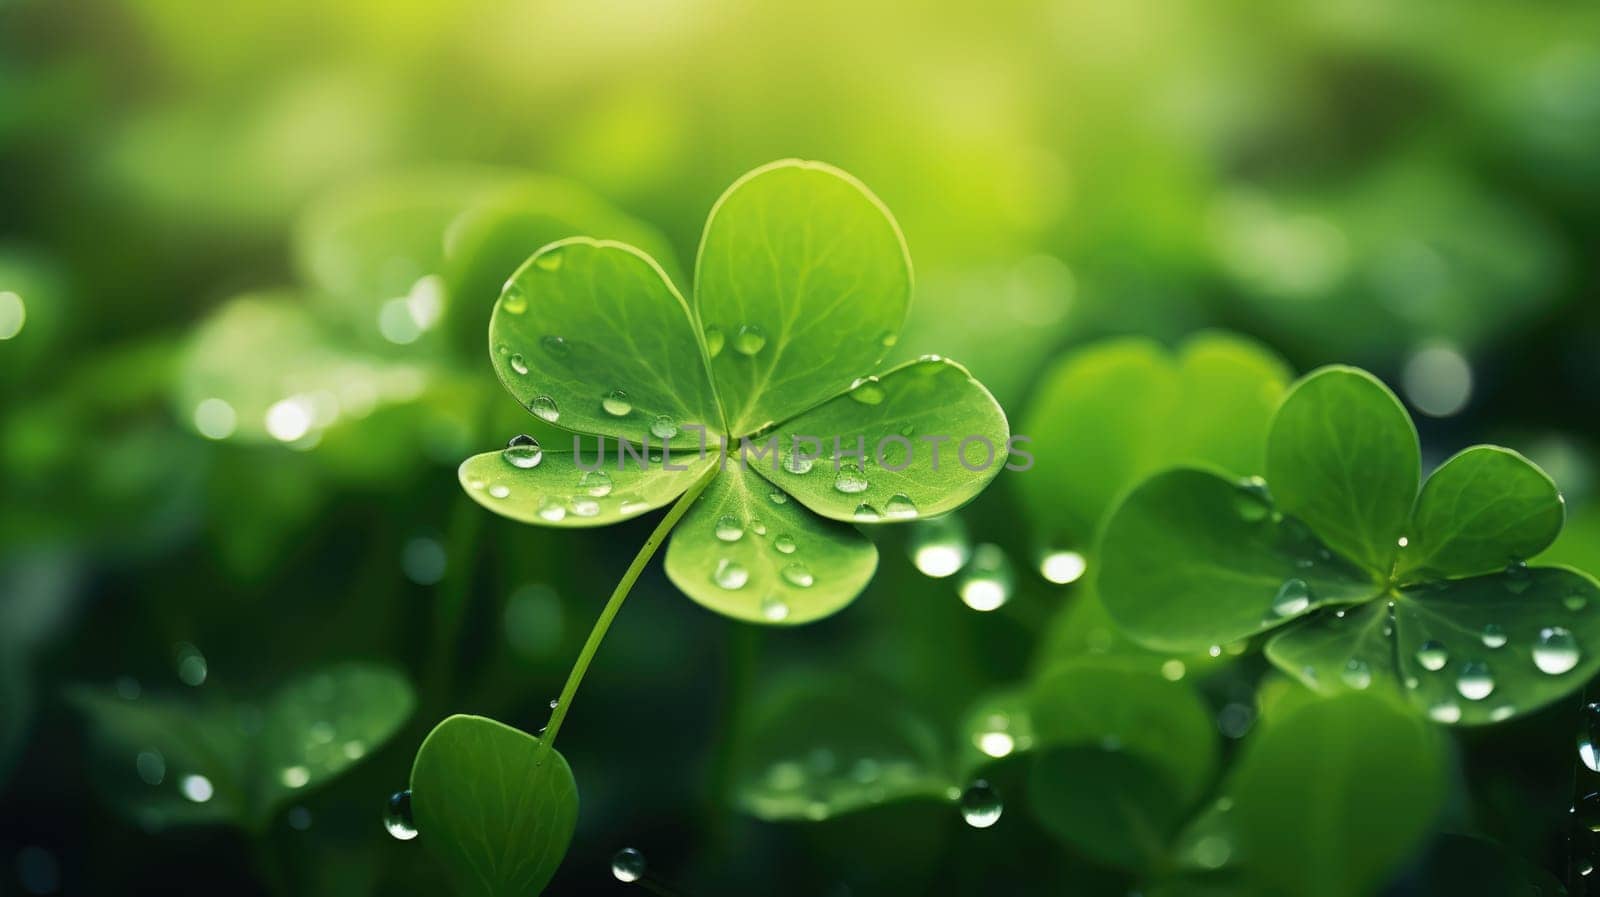 Macro view of green four-leaf clover with morning dew with blurred background, St. Patricks Day luck